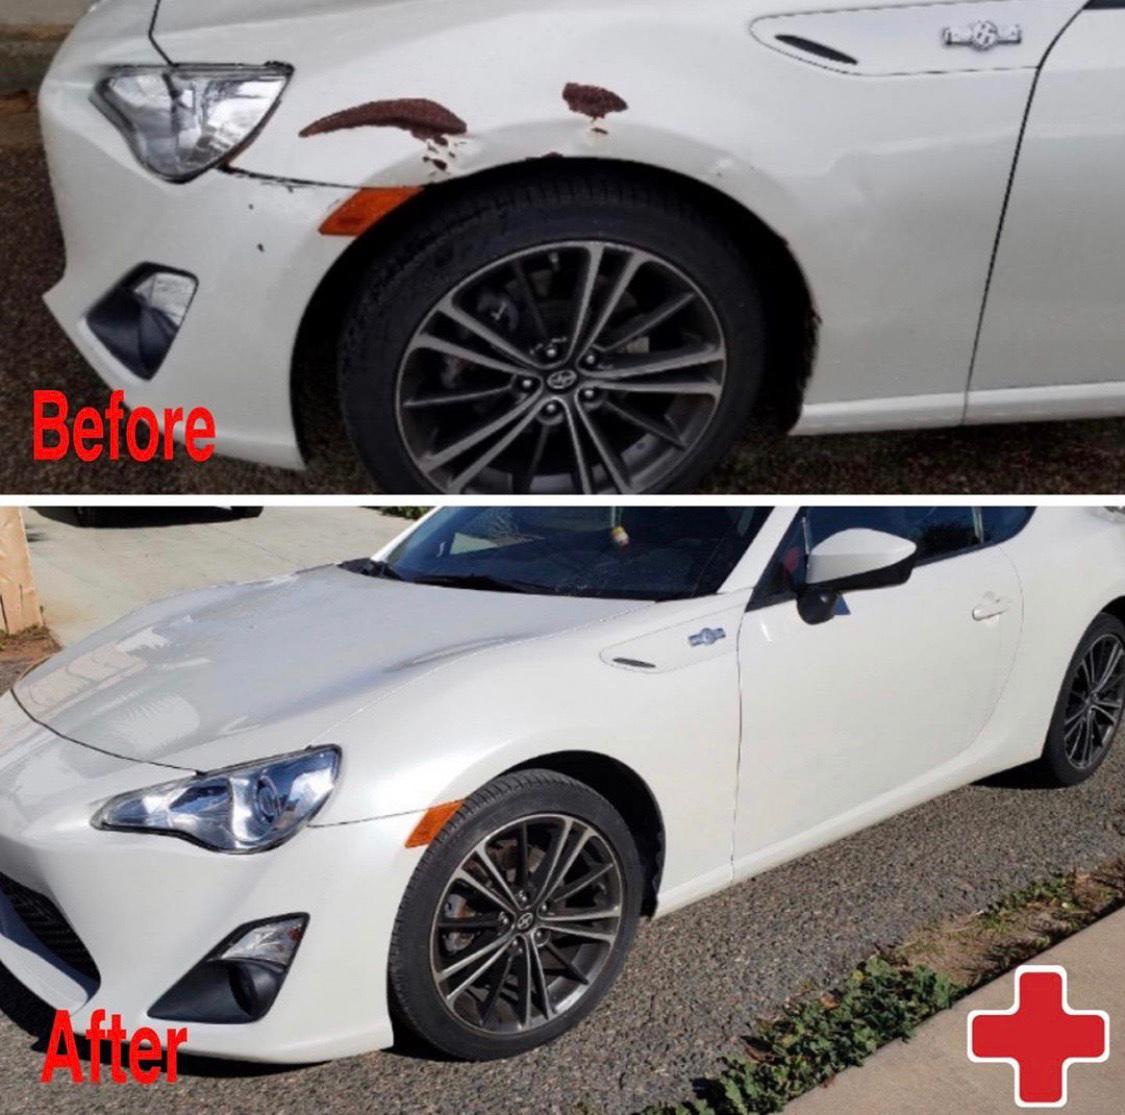 When accidents happen, Carbulance Mobile Auto Body is here to help with our professional collision repair services. We handle all aspects of collision damage, from structural repairs to cosmetic refinishing, ensuring your vehicle is safe and looks its best in San Diego, CA.